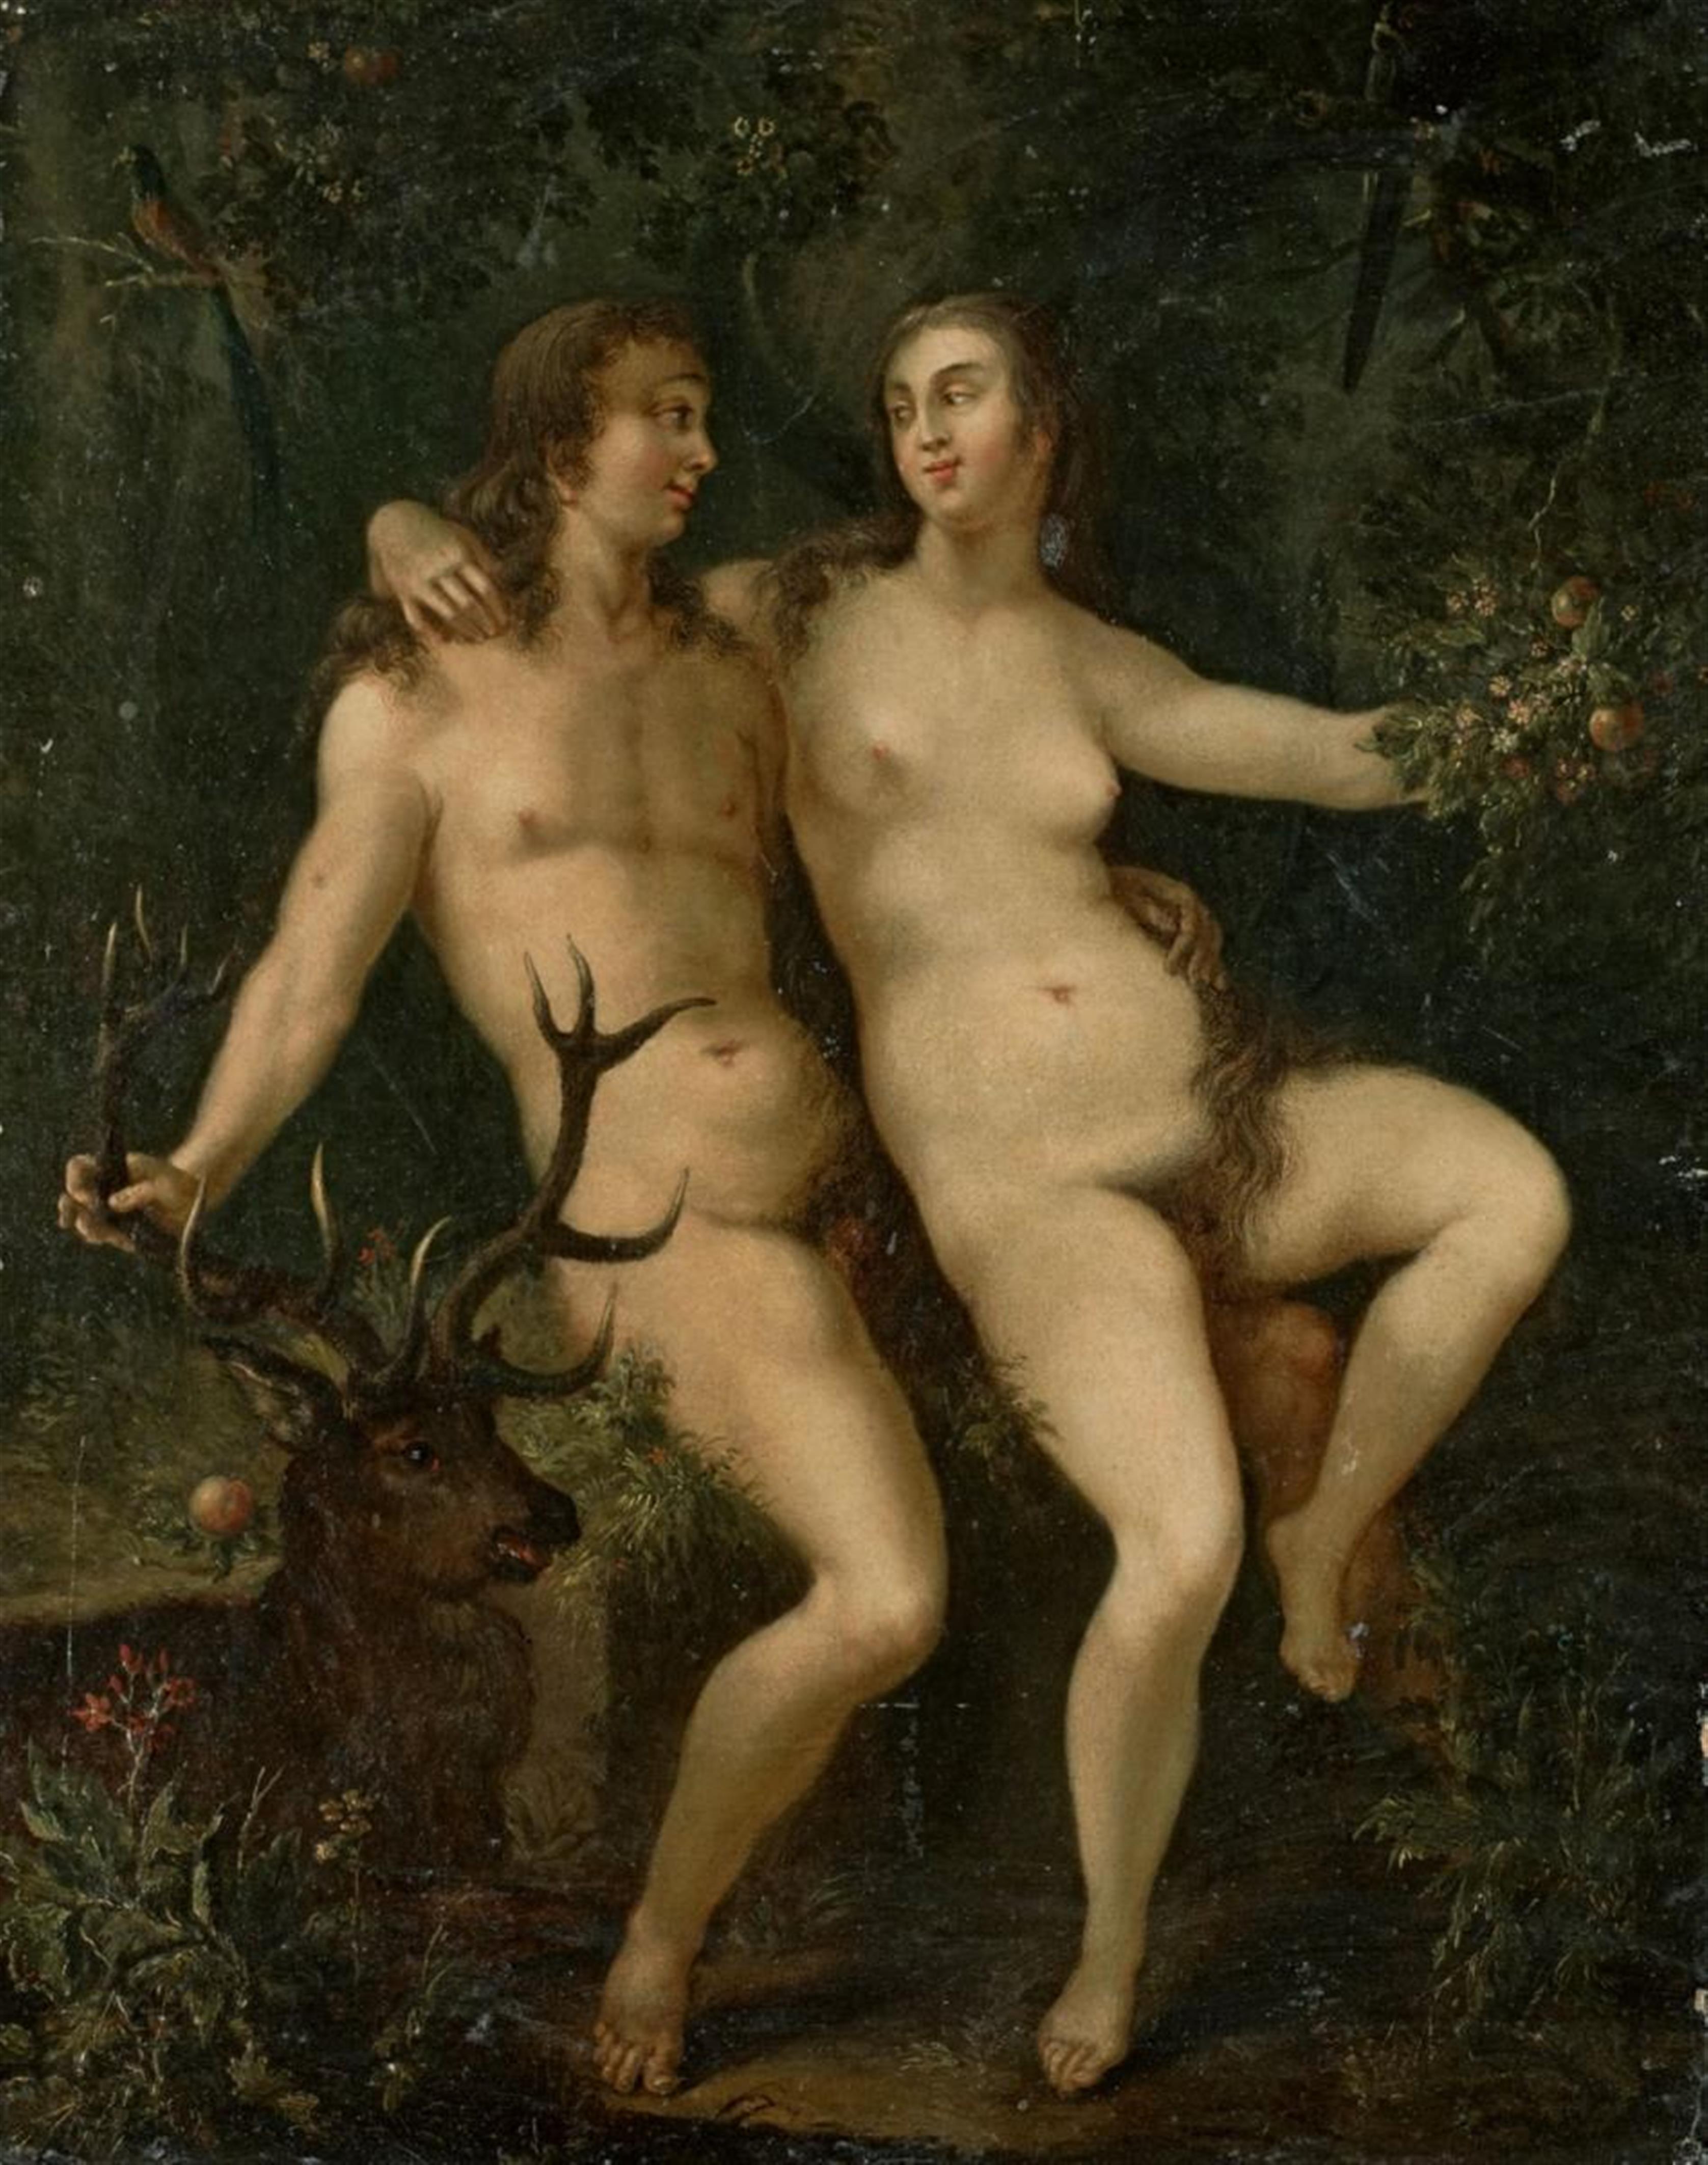 South German School, 17th century - PARADISE WITH ADAM AND EVE - image-1